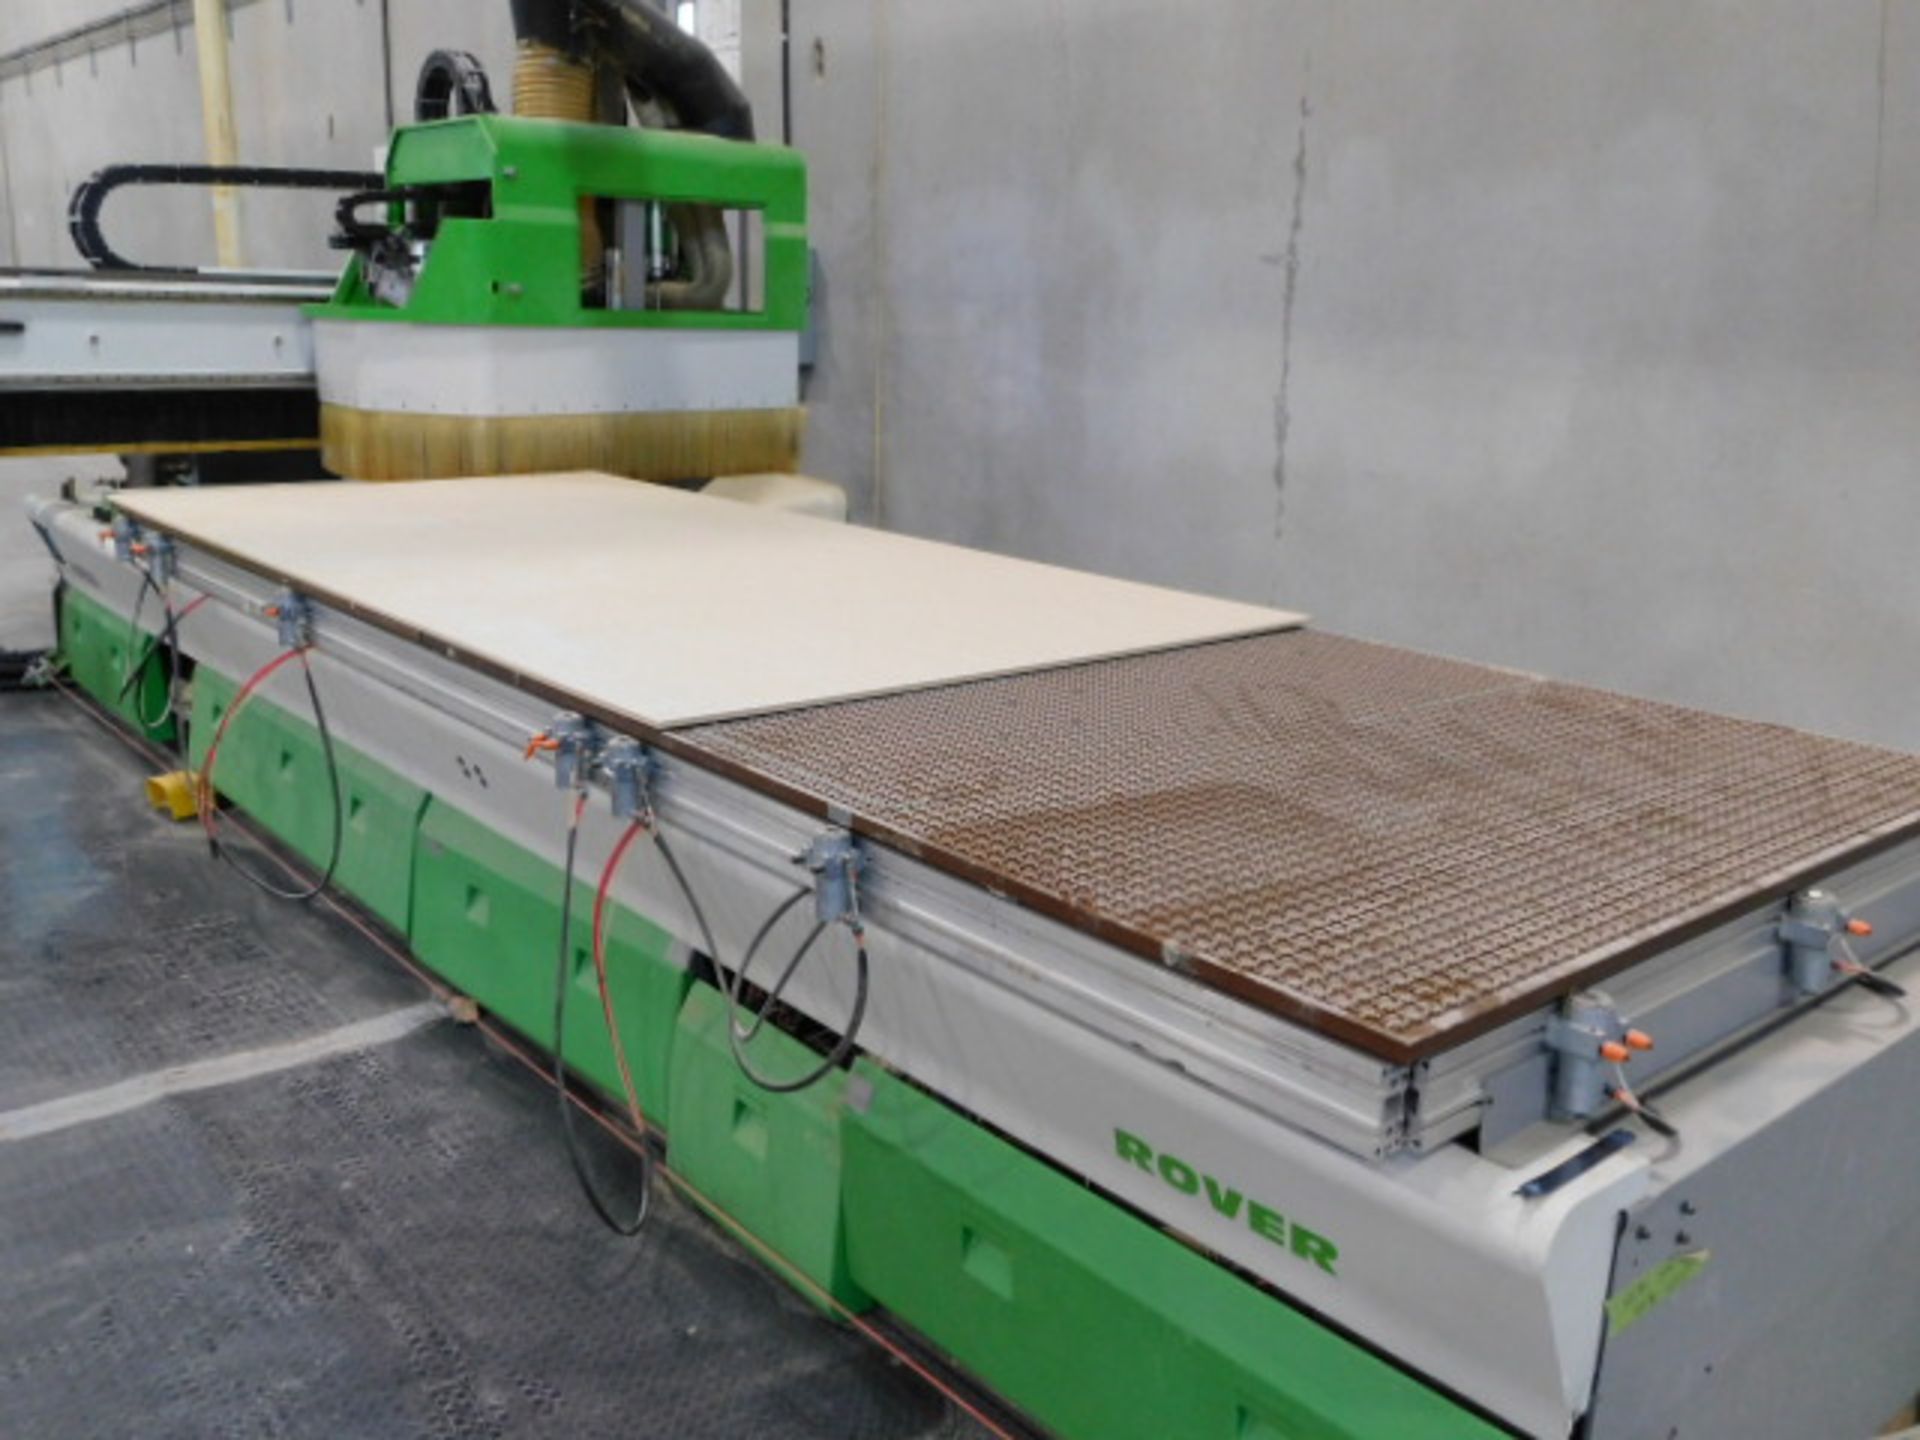 BIESSE ROVER CNC ROUTER, 30 L2, 7 TOOL HOLDER, 15’ NESTED TABLE, S.N 23881,440V - Image 5 of 5